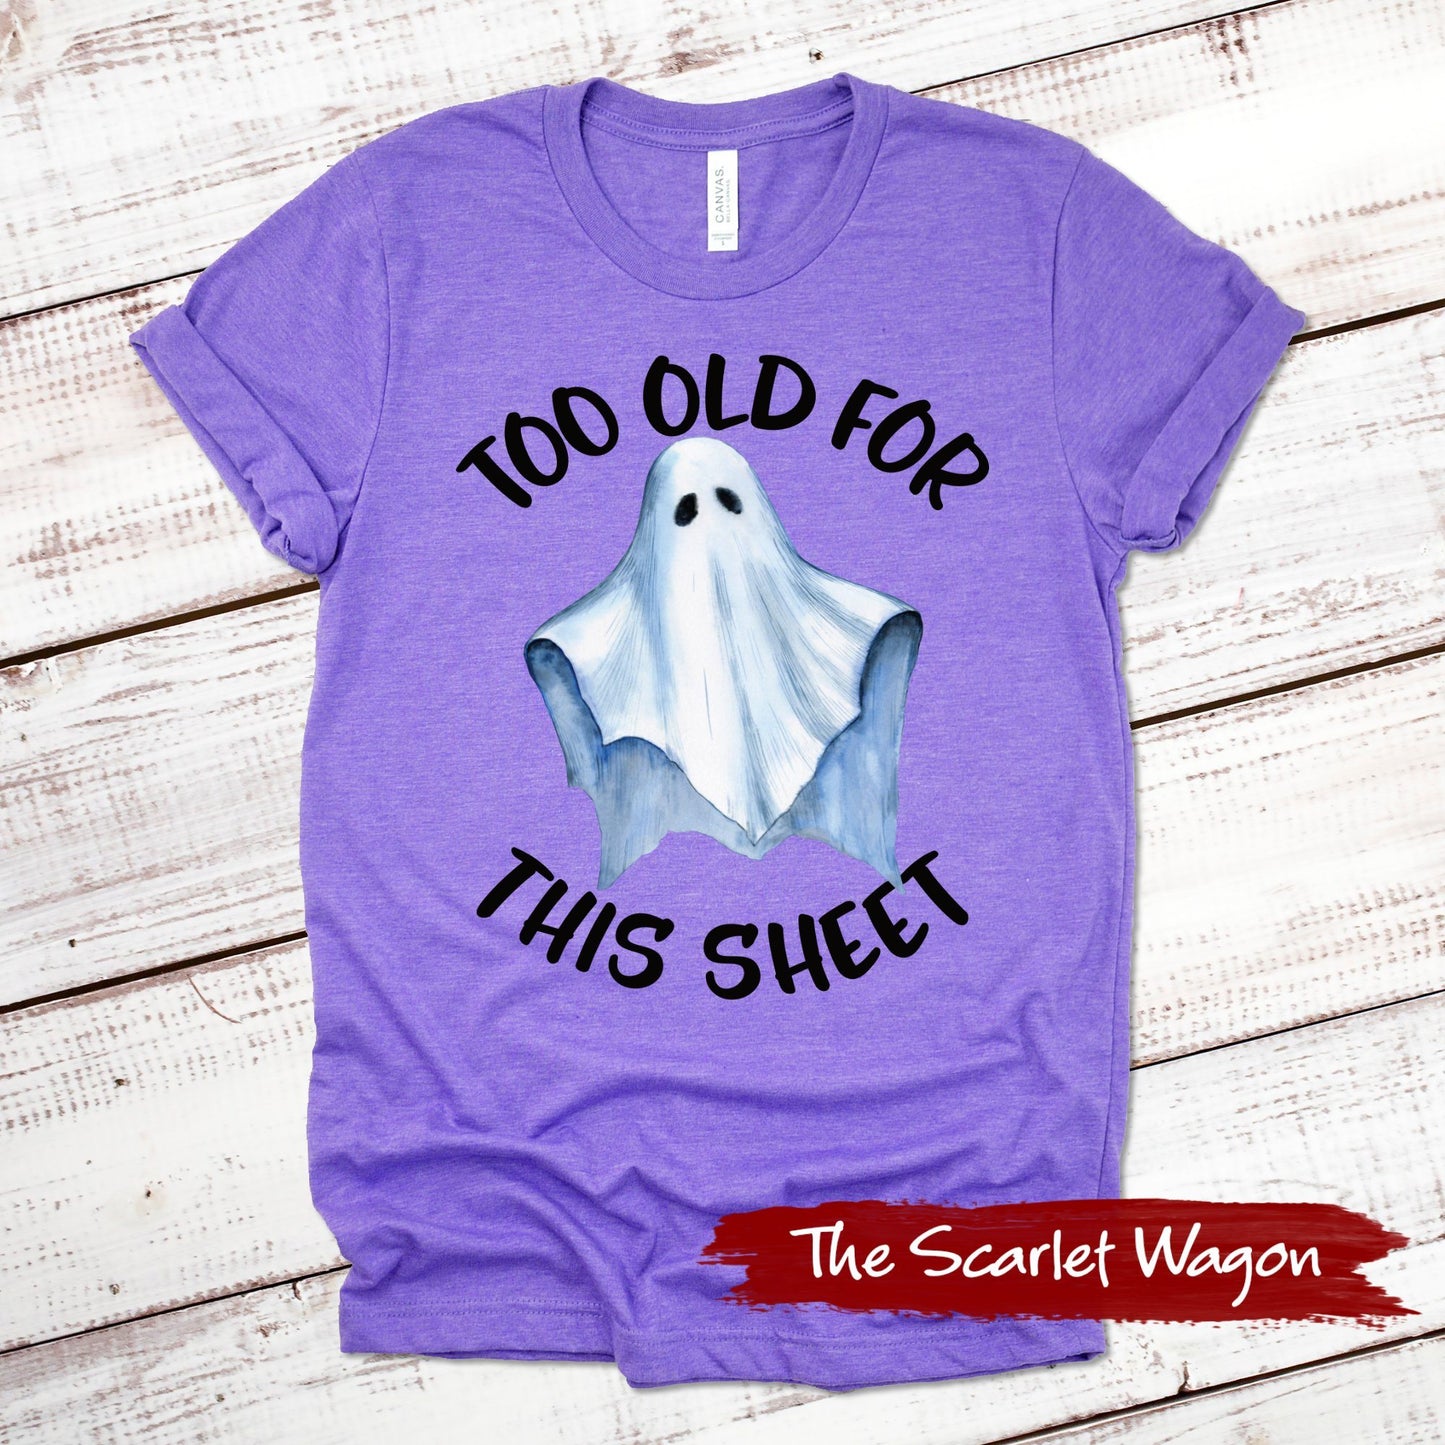 Too Old for This Sheet Halloween Shirt Scarlet Wagon Heather Purple XS 